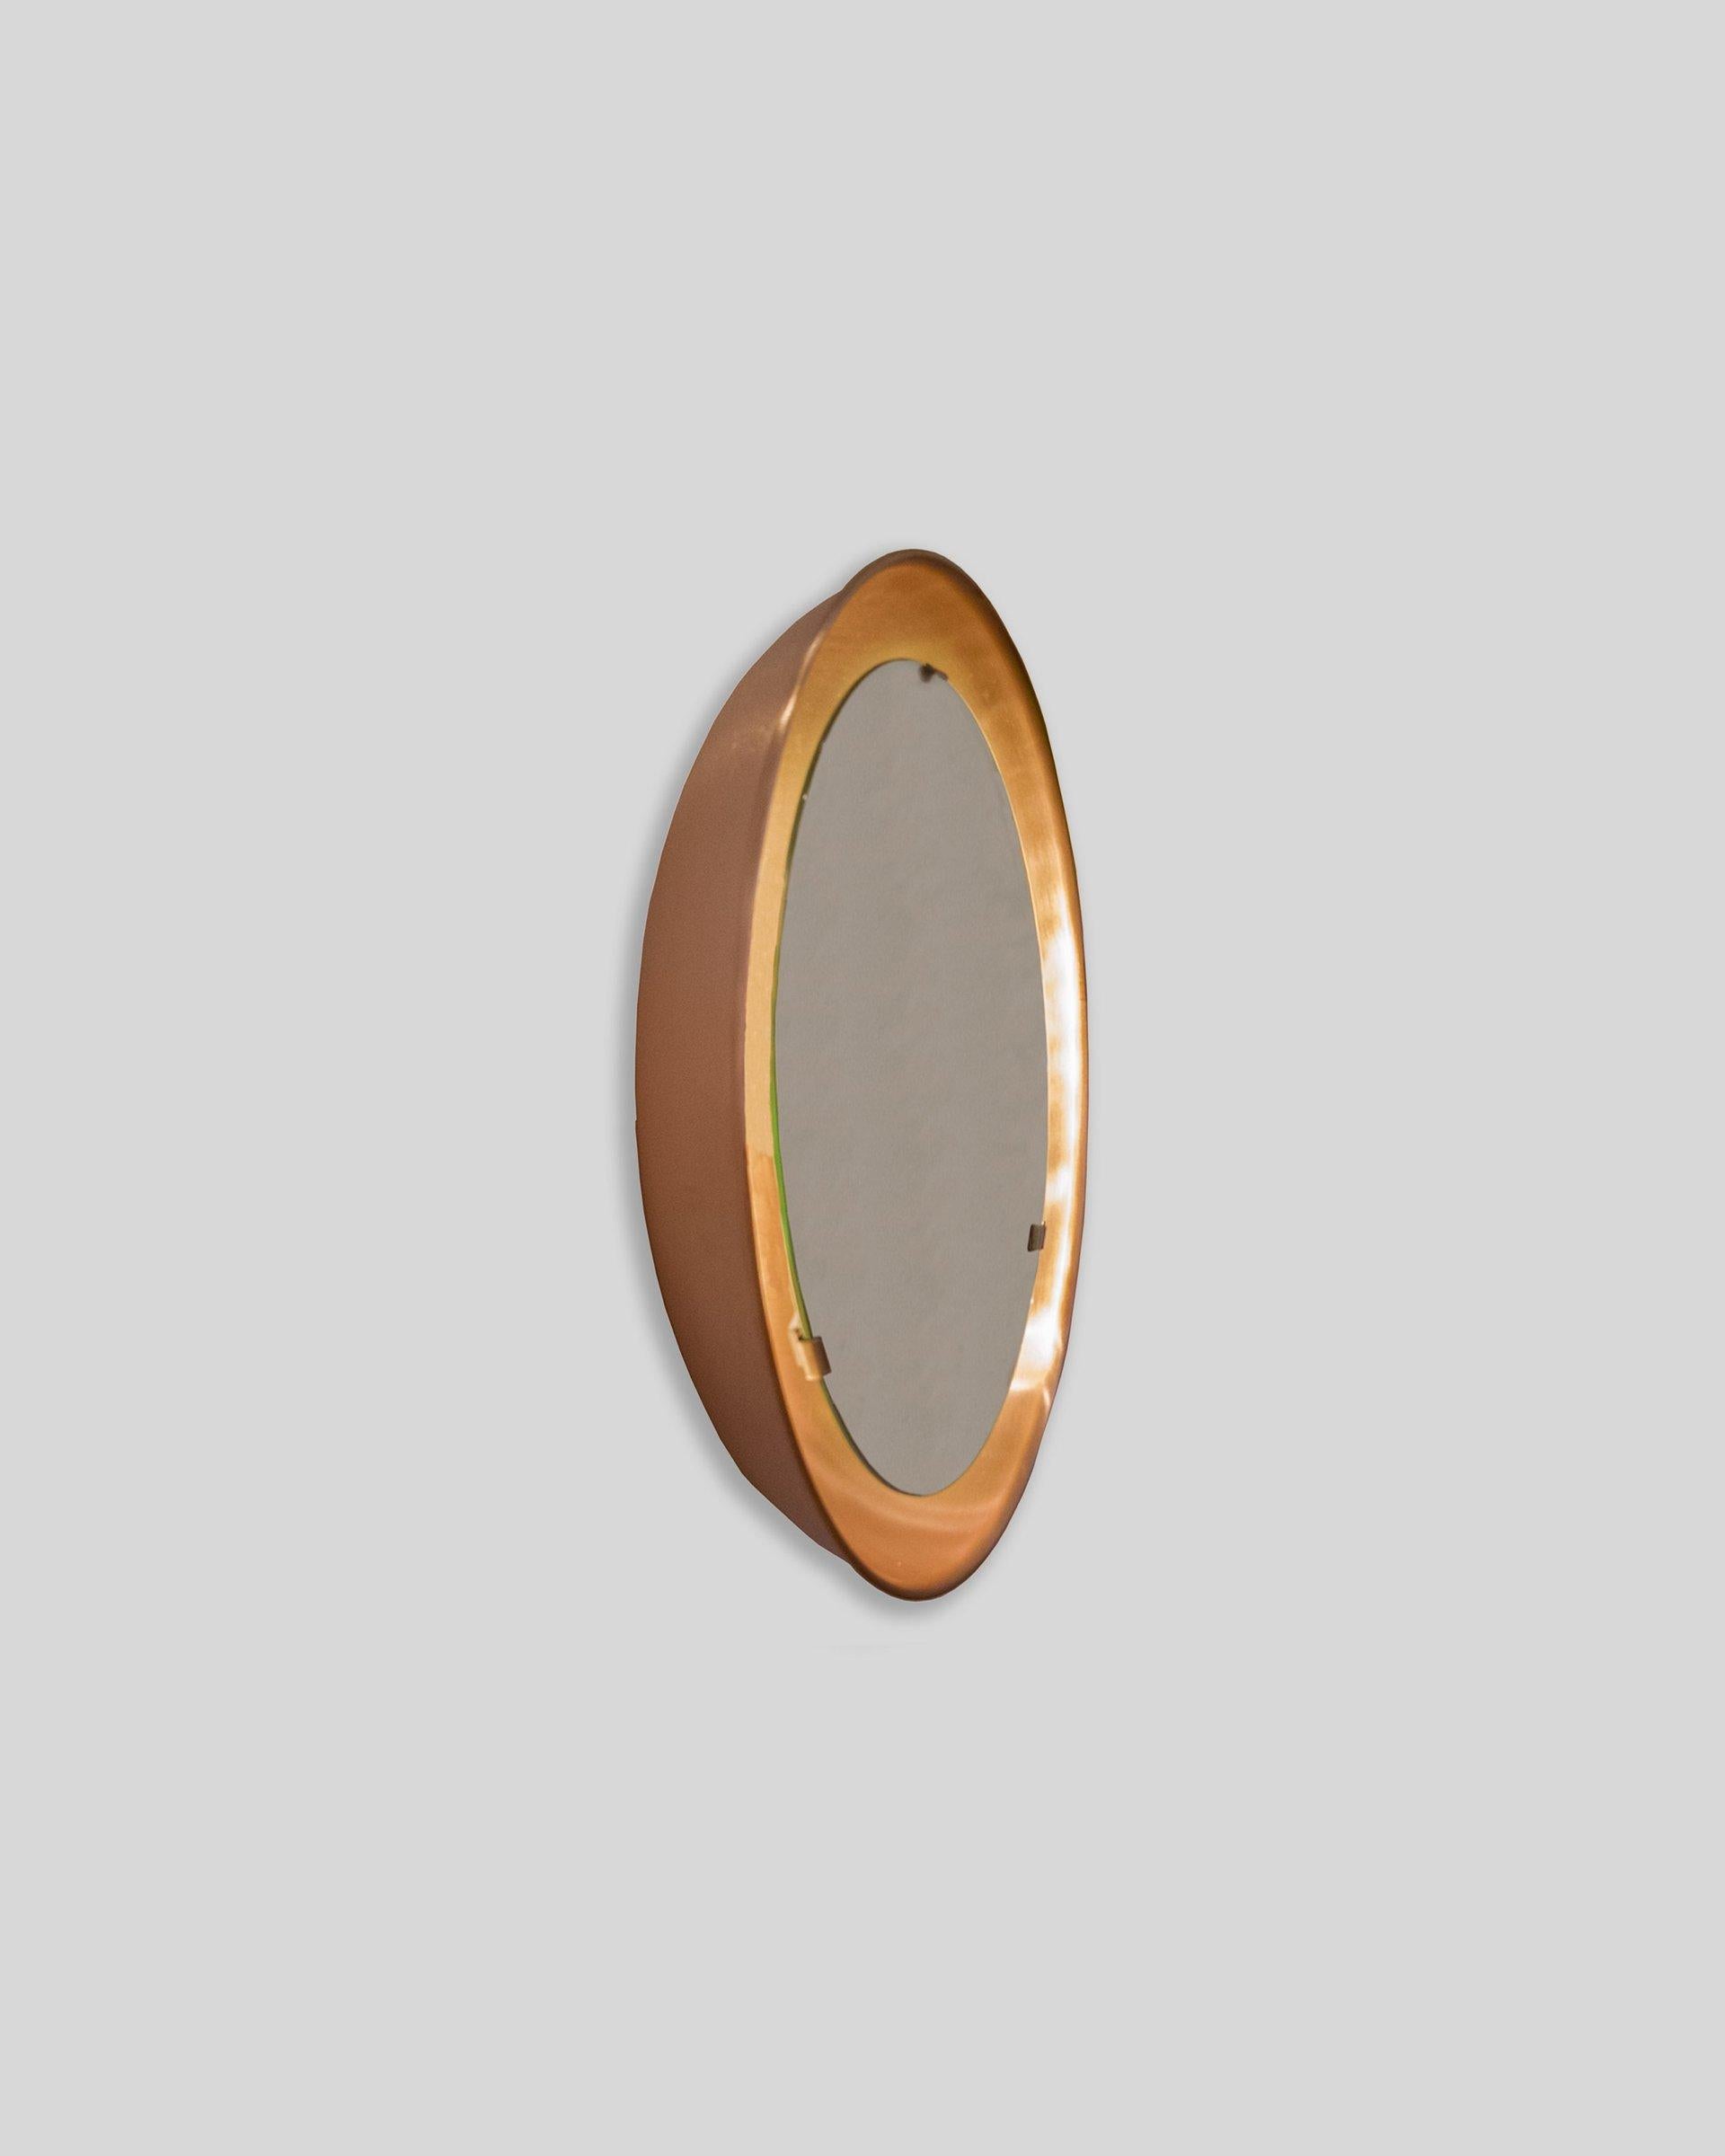 Created in the late 1930s, the PH mirror features backlit illumination that provides a reflection that is free from shadows and glare. PH’s wall mounted mirror design fits harmoniously with the widest variety of interior settings – from the grandest